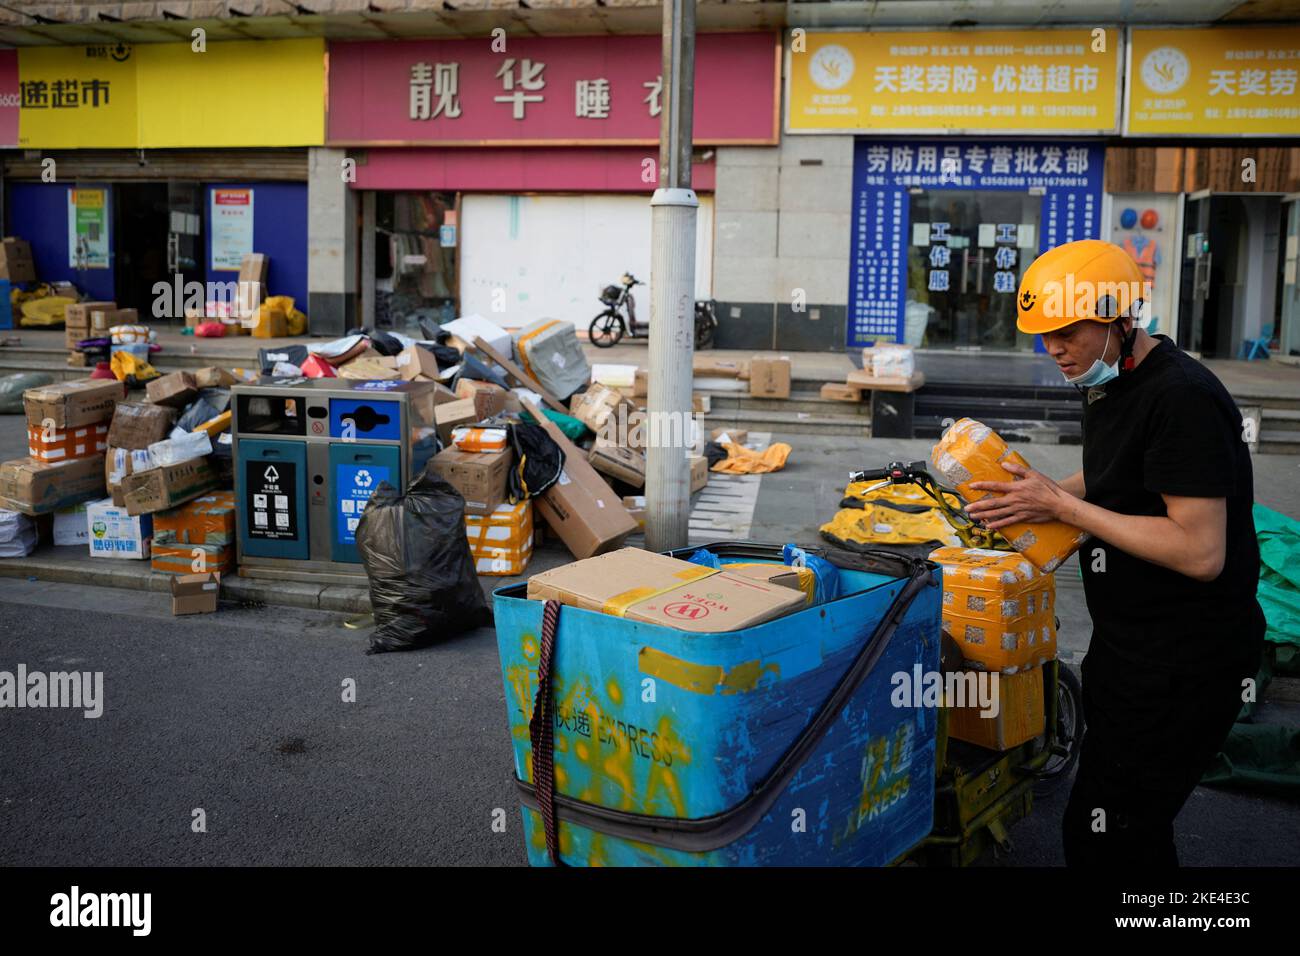 A delivery worker sorts parcels at a makeshift logistics station ahead of Alibaba's Singles' Day shopping festival, following the coronavirus disease (COVID-19) outbreak in Shanghai, China, November 10, 2022. REUTERS/Aly Song Stock Photo